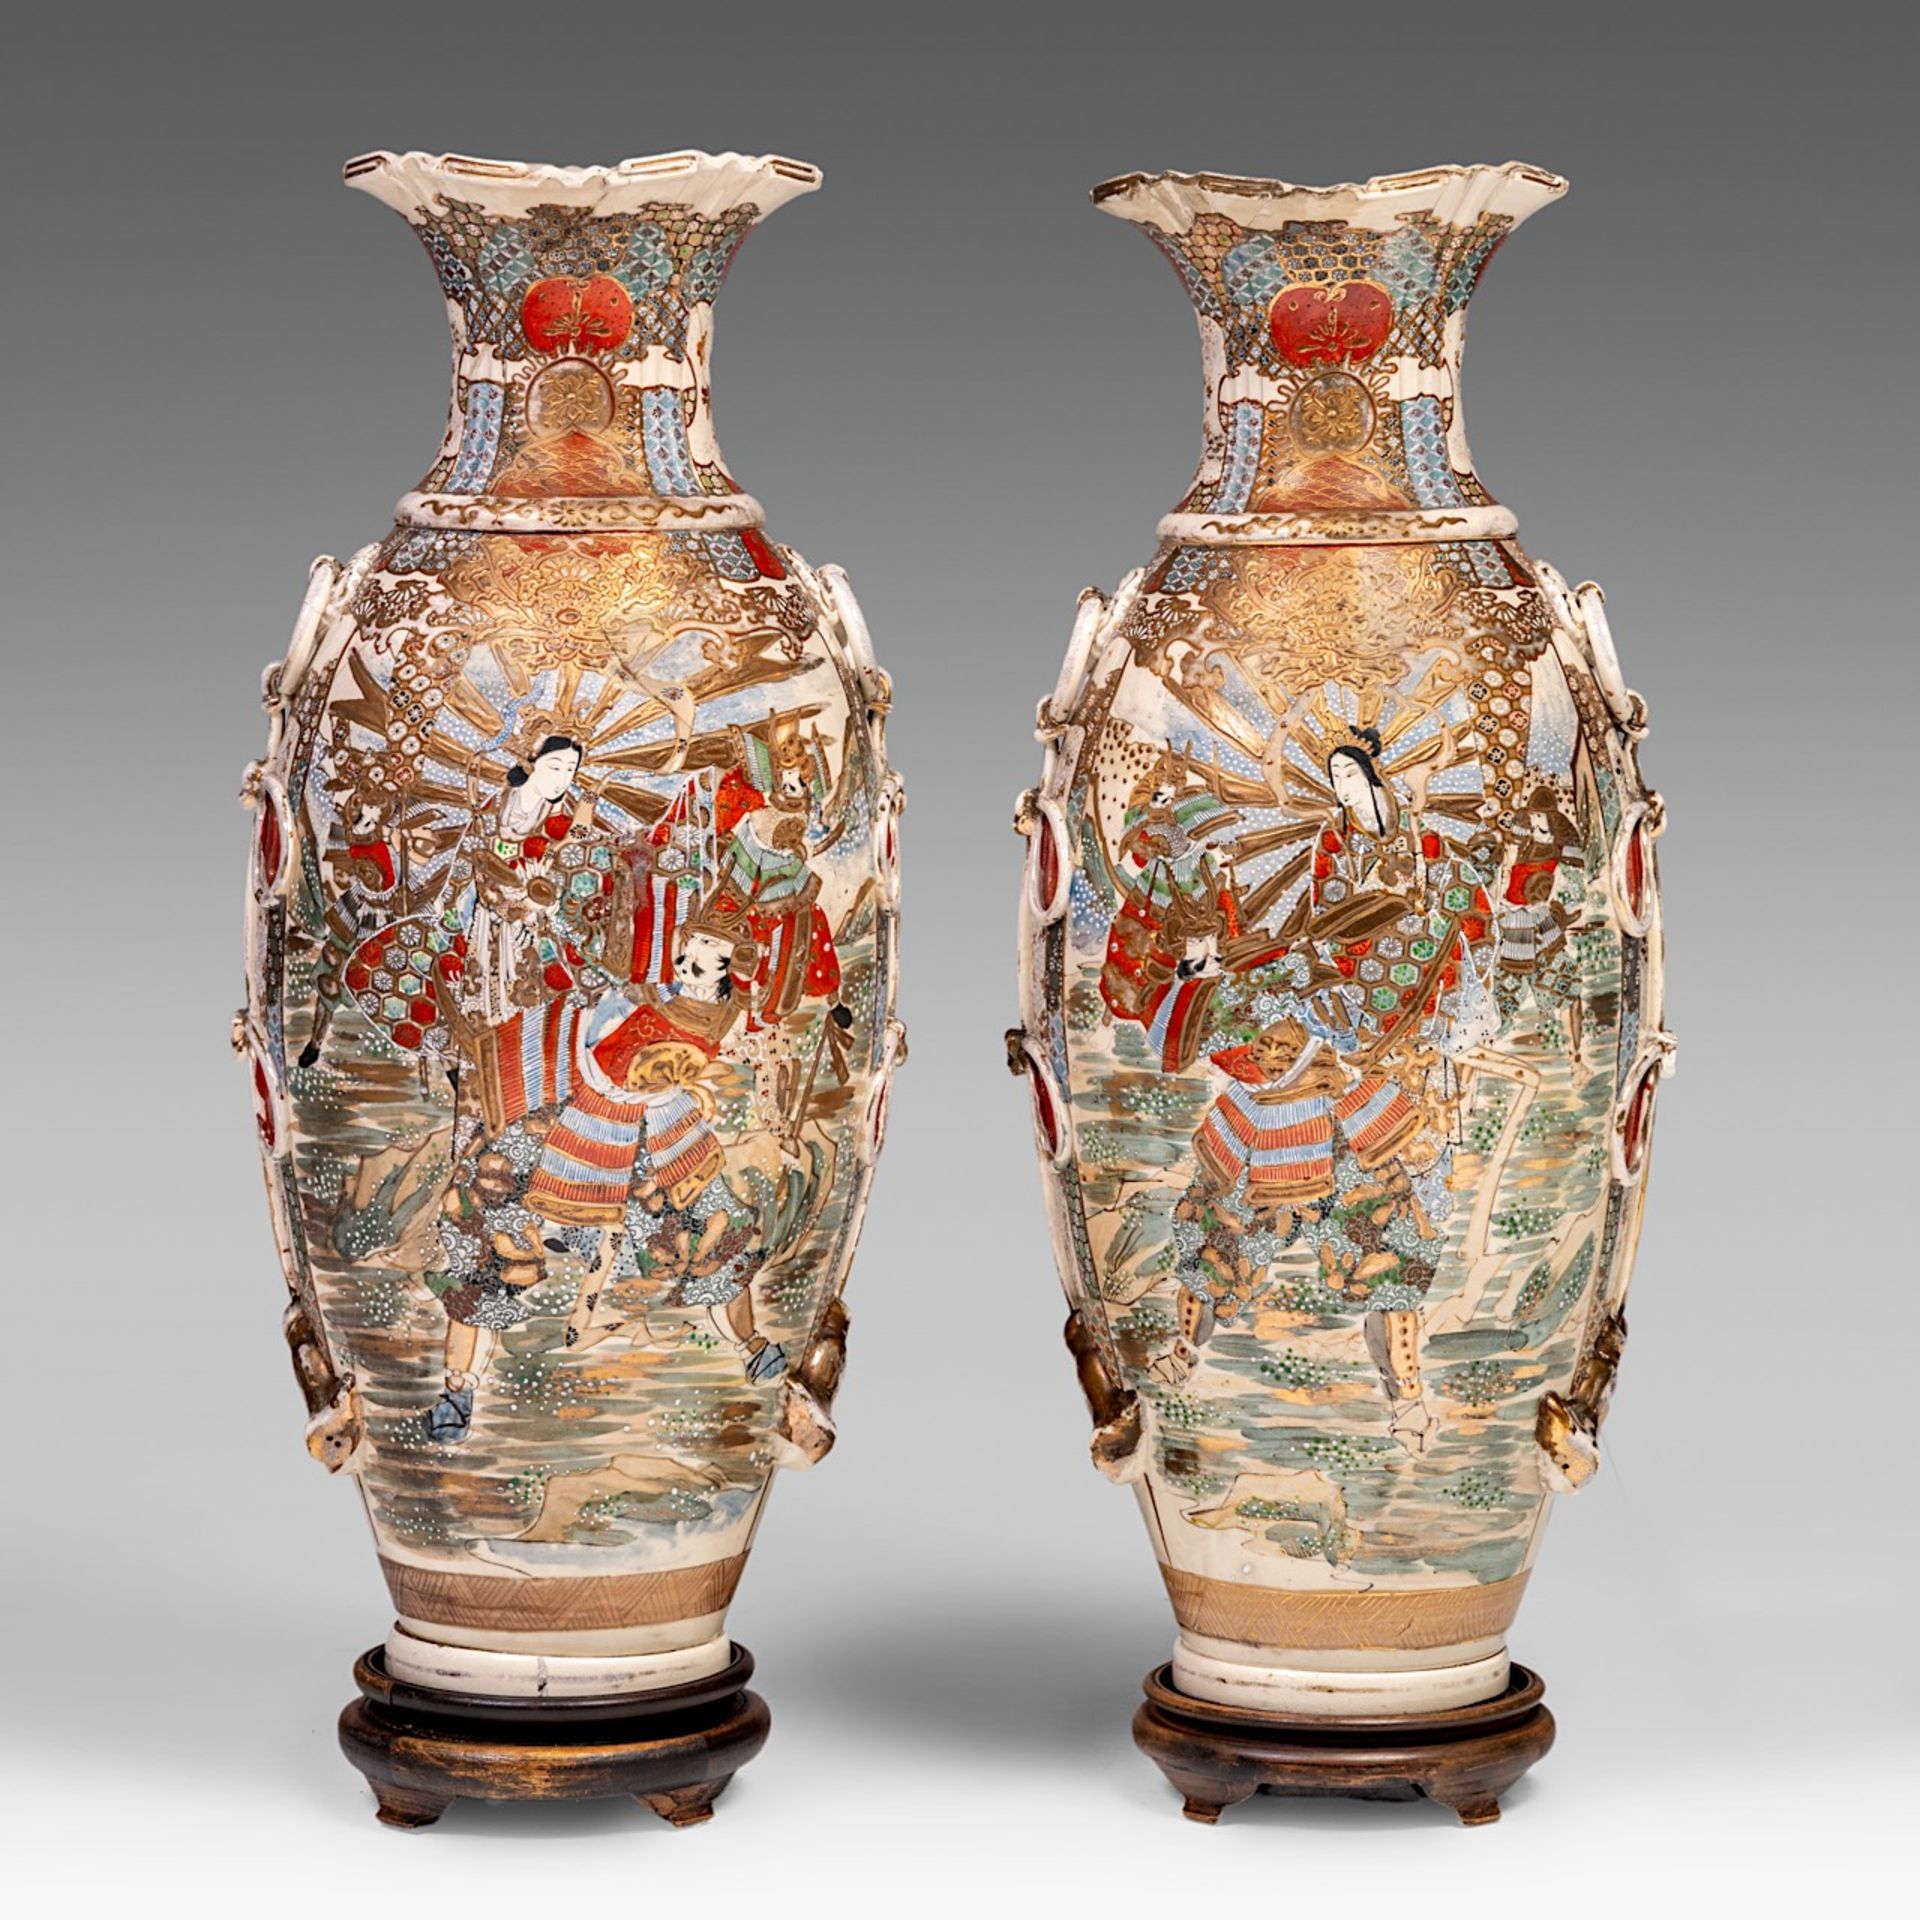 A pair of Japanese Satsuma vases standing on hardwood bases, 20thC, H 79 cm (without base)